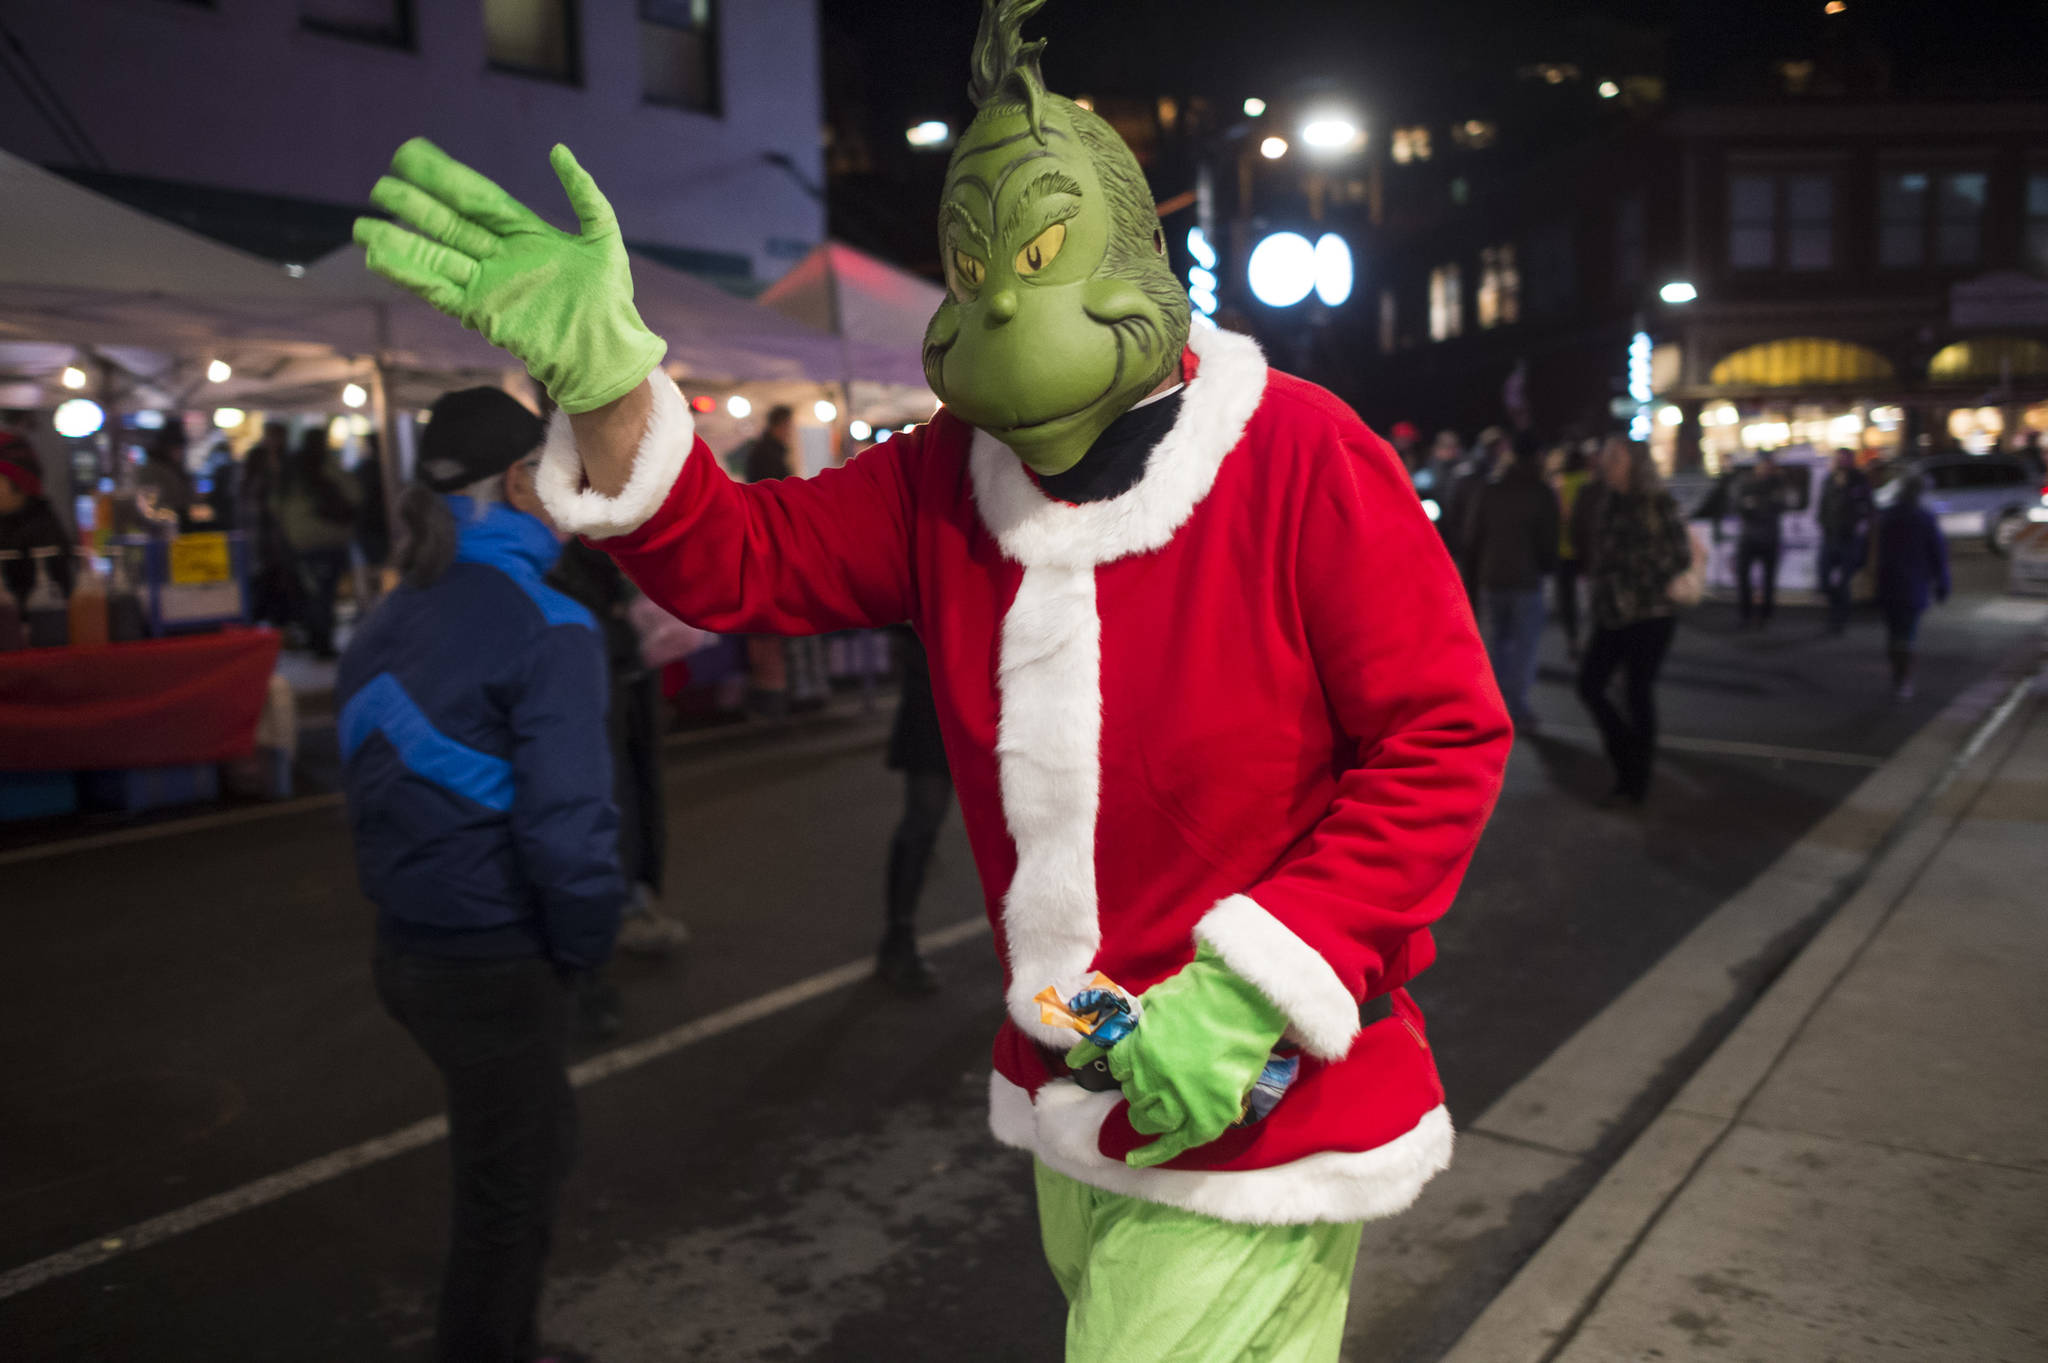 The Grinch makes his appearance on Front Street during Gallery Walk on Friday, Dec. 7, 2018. (Michael Penn | Juneau Empire)